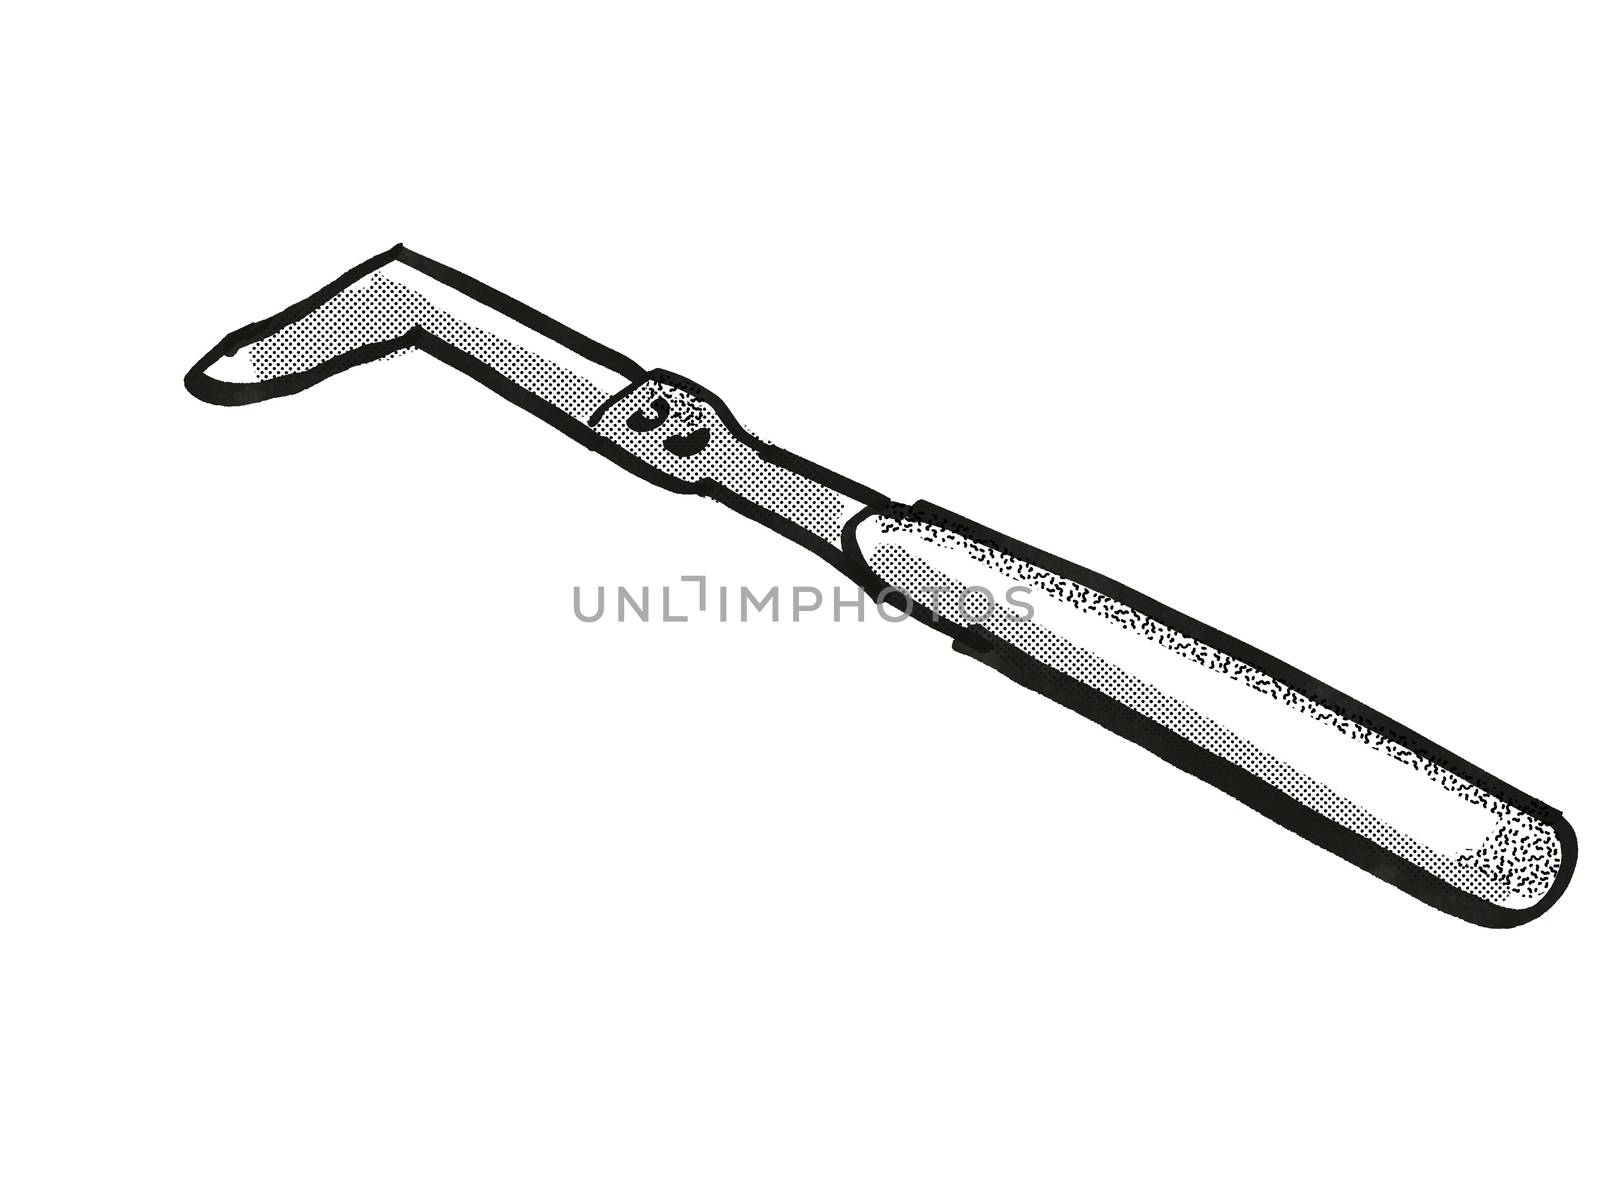 Retro cartoon style drawing of an edging knife, a garden or gardening tool equipment on isolated white background done in black and white